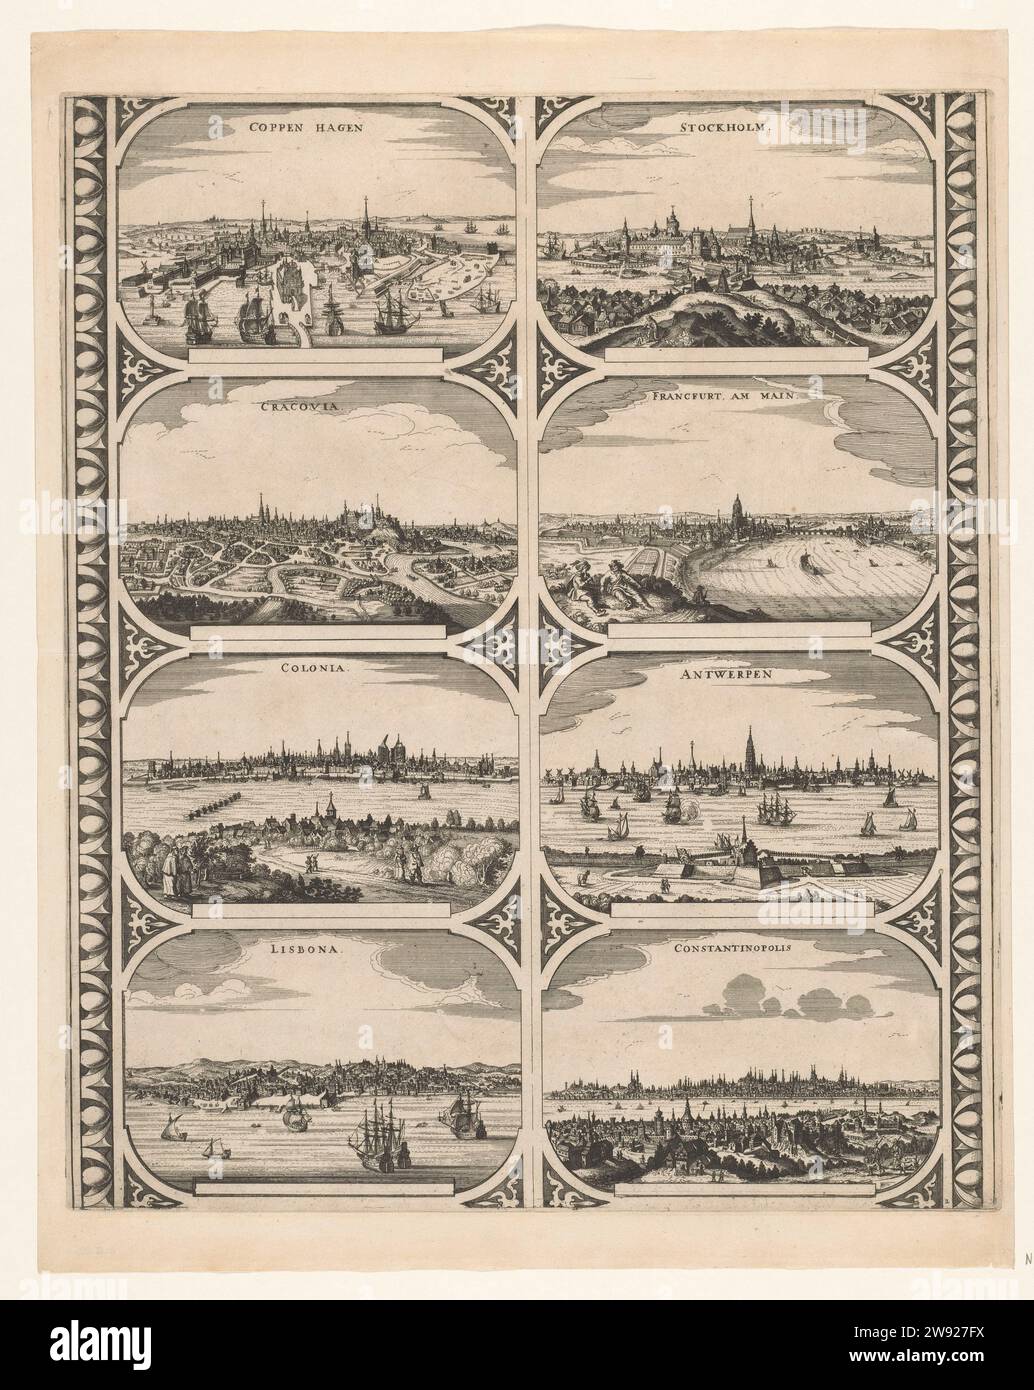 Coppen Hagen / Cracovia / Colonia / Lisbona / Stockholm / Francfurt am Main / Antwerp / Constantinopolis, Anonymous, 1670 - 1672 print Leaf with two vertical strips, each with four faces on cities in Europe: Copenhagen, Krakow, Cologne, Lisbon, Stockholm, Frankfurt am Main, Antwerp and Constantinople. Numbered below: 2. Unsitured leaf with eight edge figures intended to stick a map of a continent in strips as a frame. Amsterdam paper etching maps of cities. prospect of city, town panorama, silhouette of city Copenhagen (City). Krakow. Cologne. Lisbon. Stockholm. Frankfurt am Main. Antwerp. Con Stock Photo